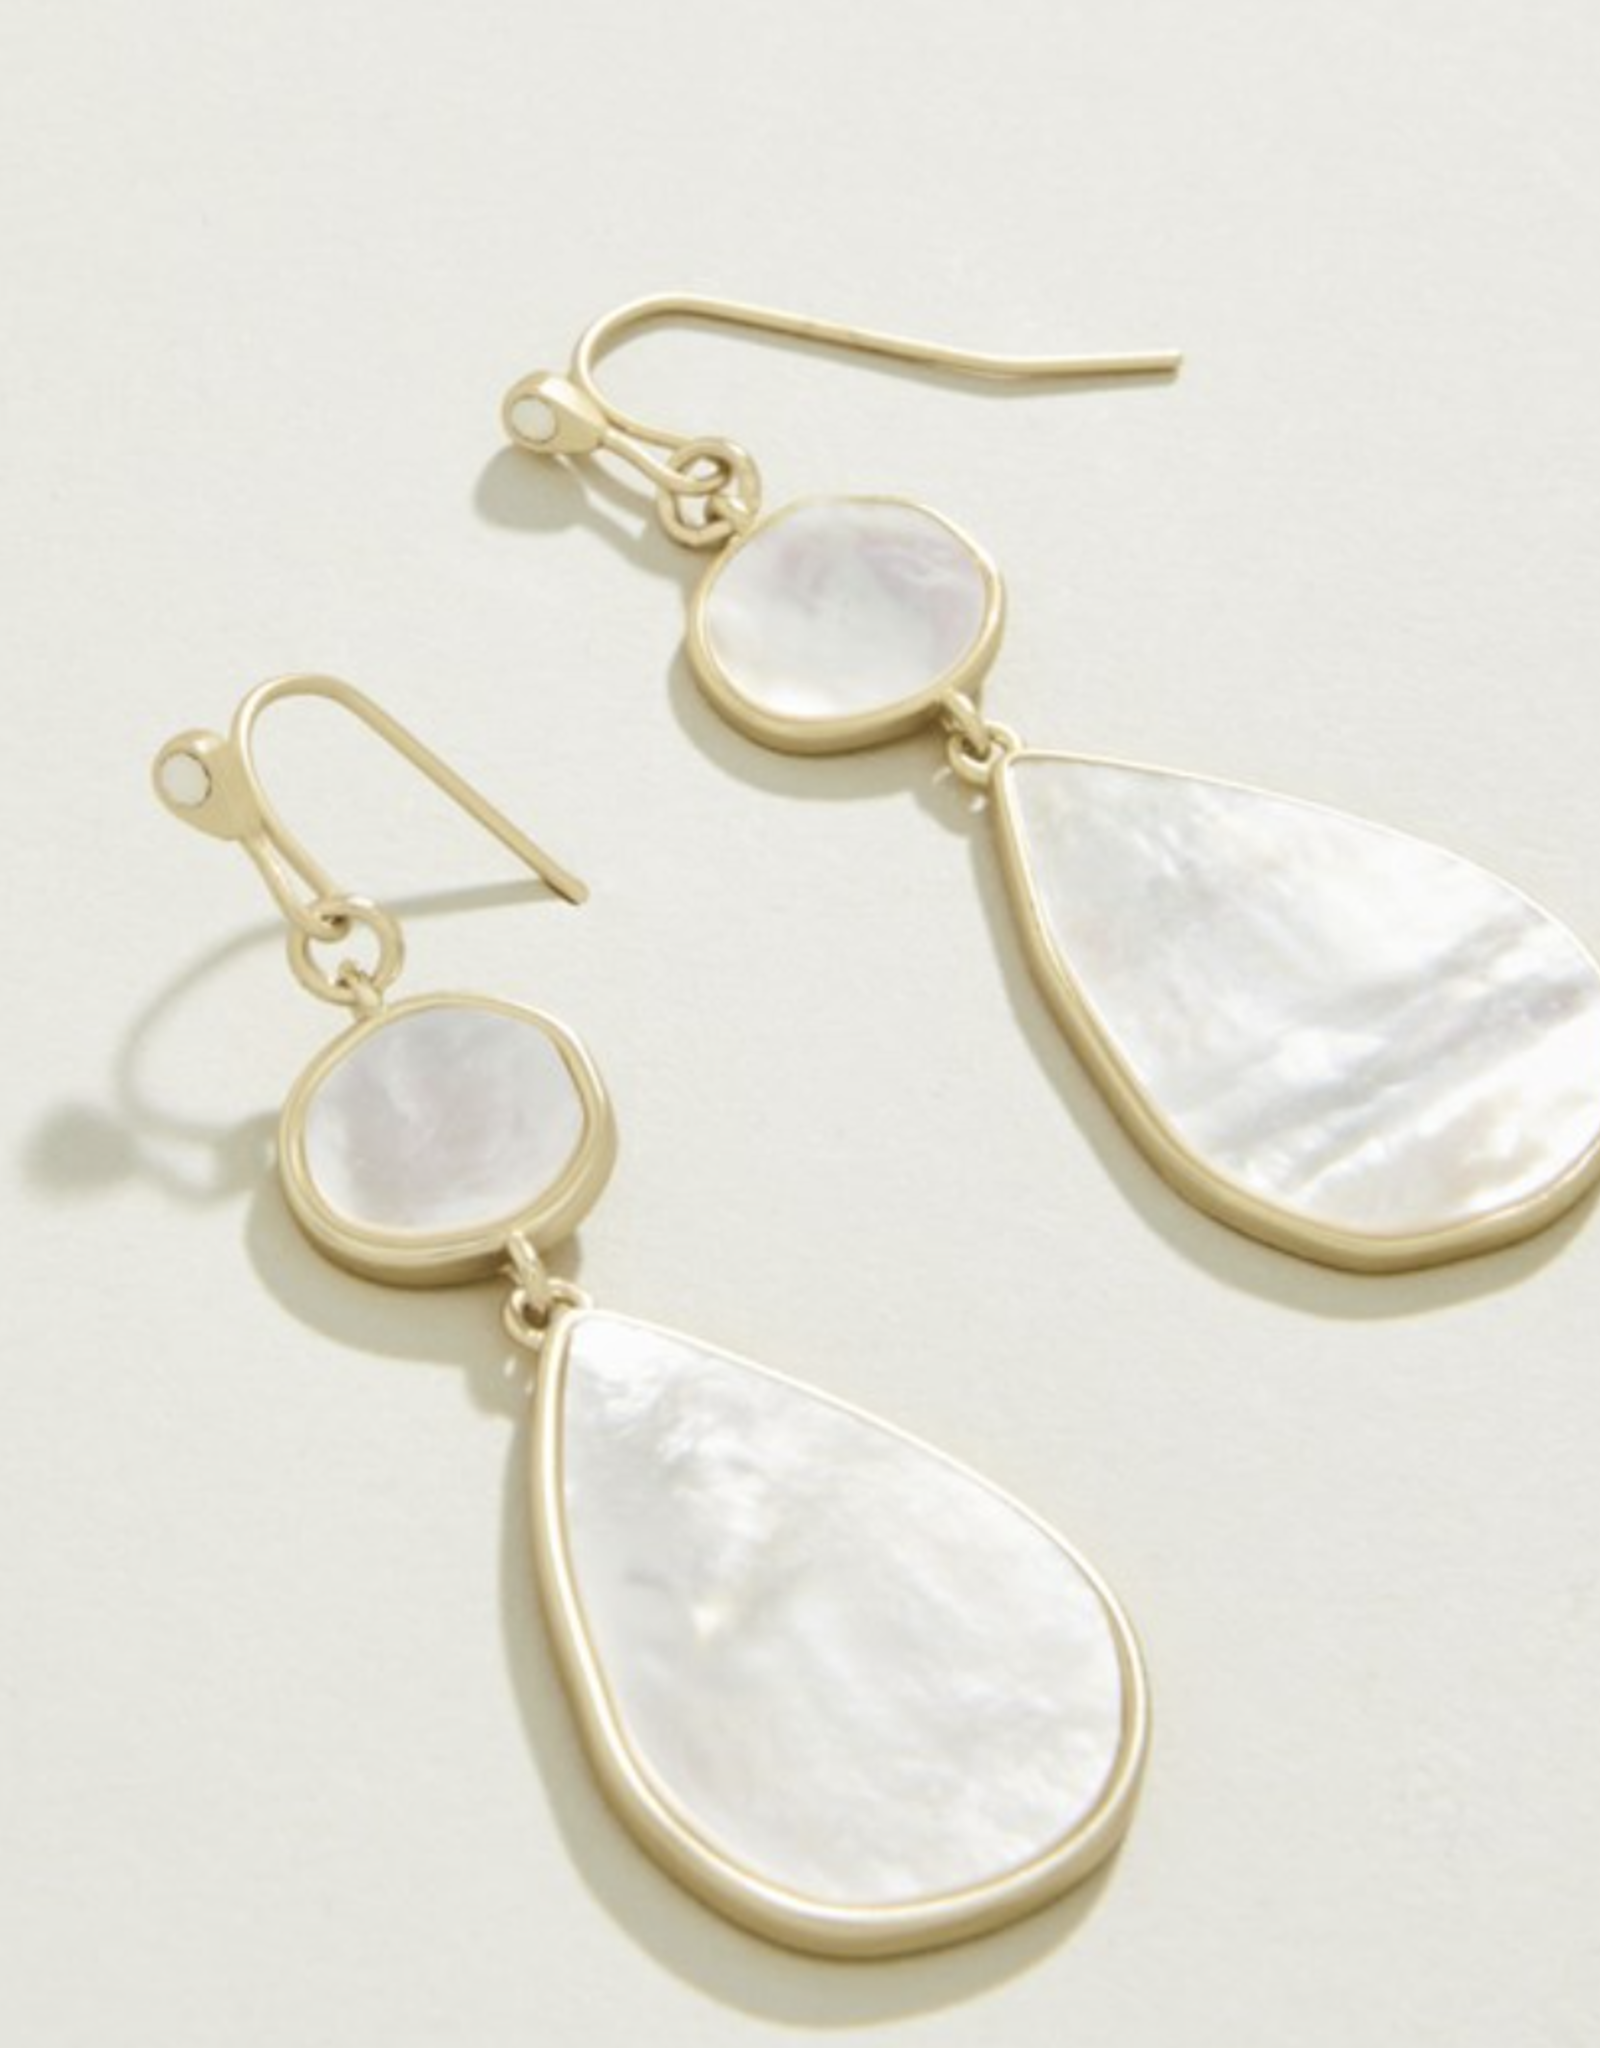 Spartina Batina Earrings Mother-of-Pearl